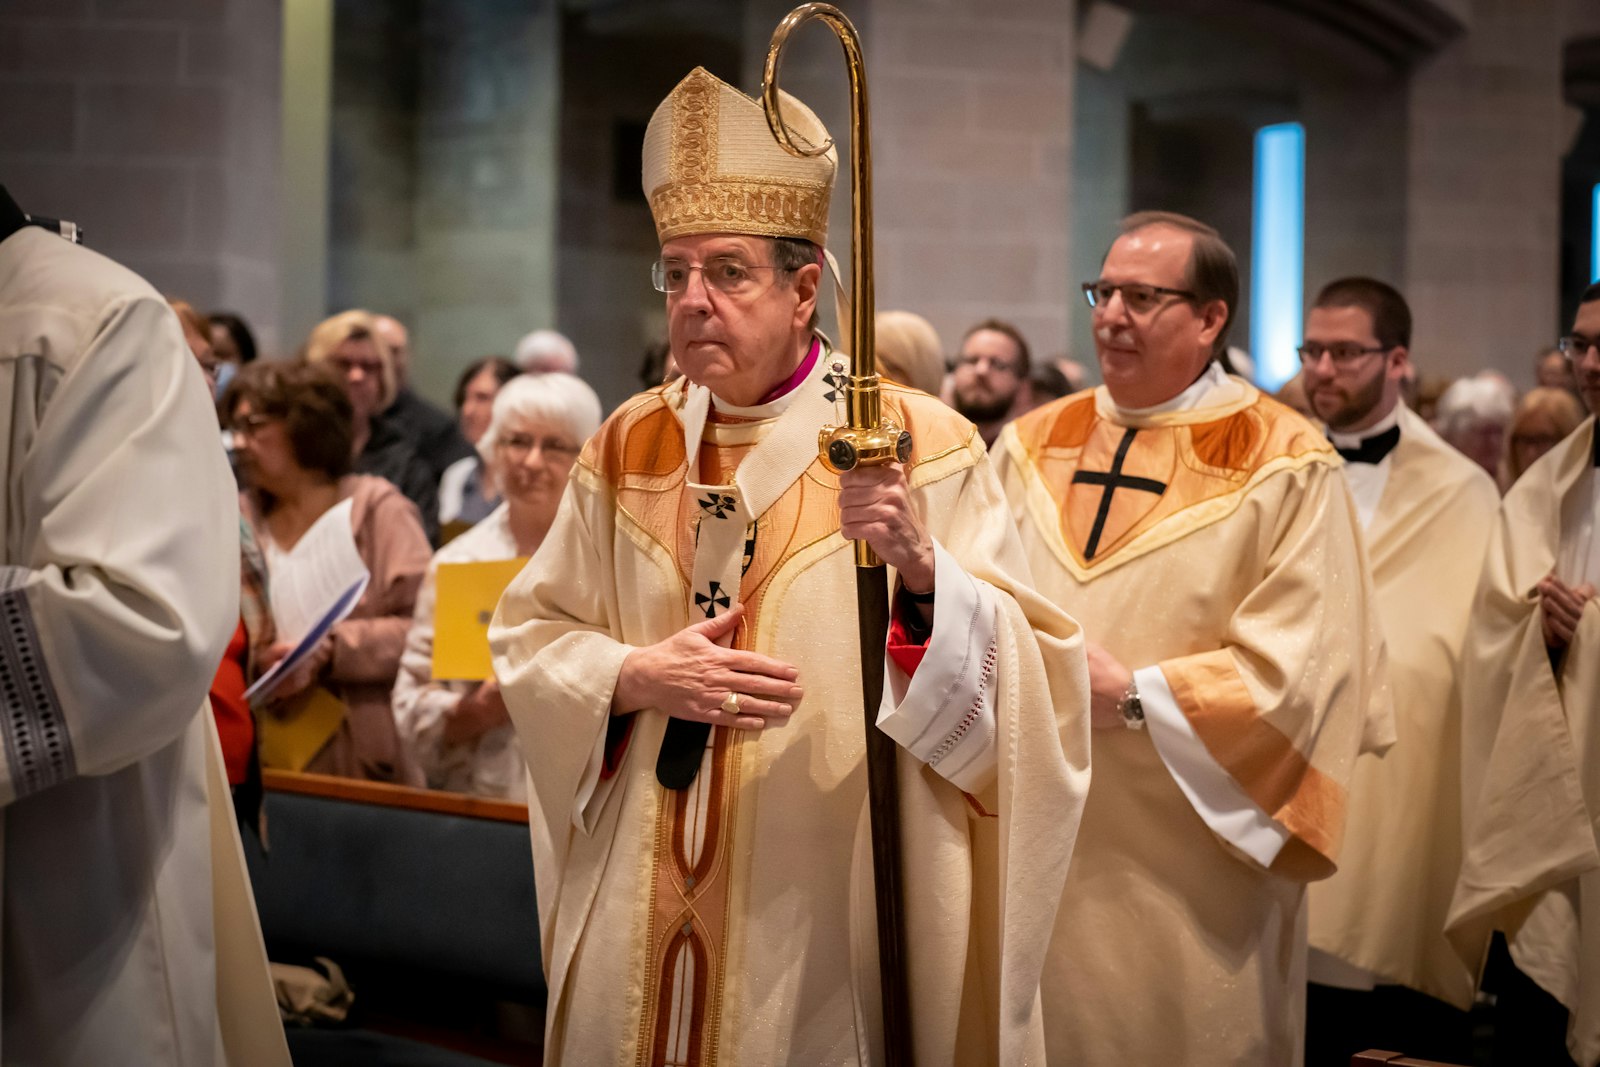 What the Holy Spirit enabled Jesus to accomplish in his paschal mystery is also what the Holy Spirit enables the faithful to accomplish as members of Jesus, the archbishop said.